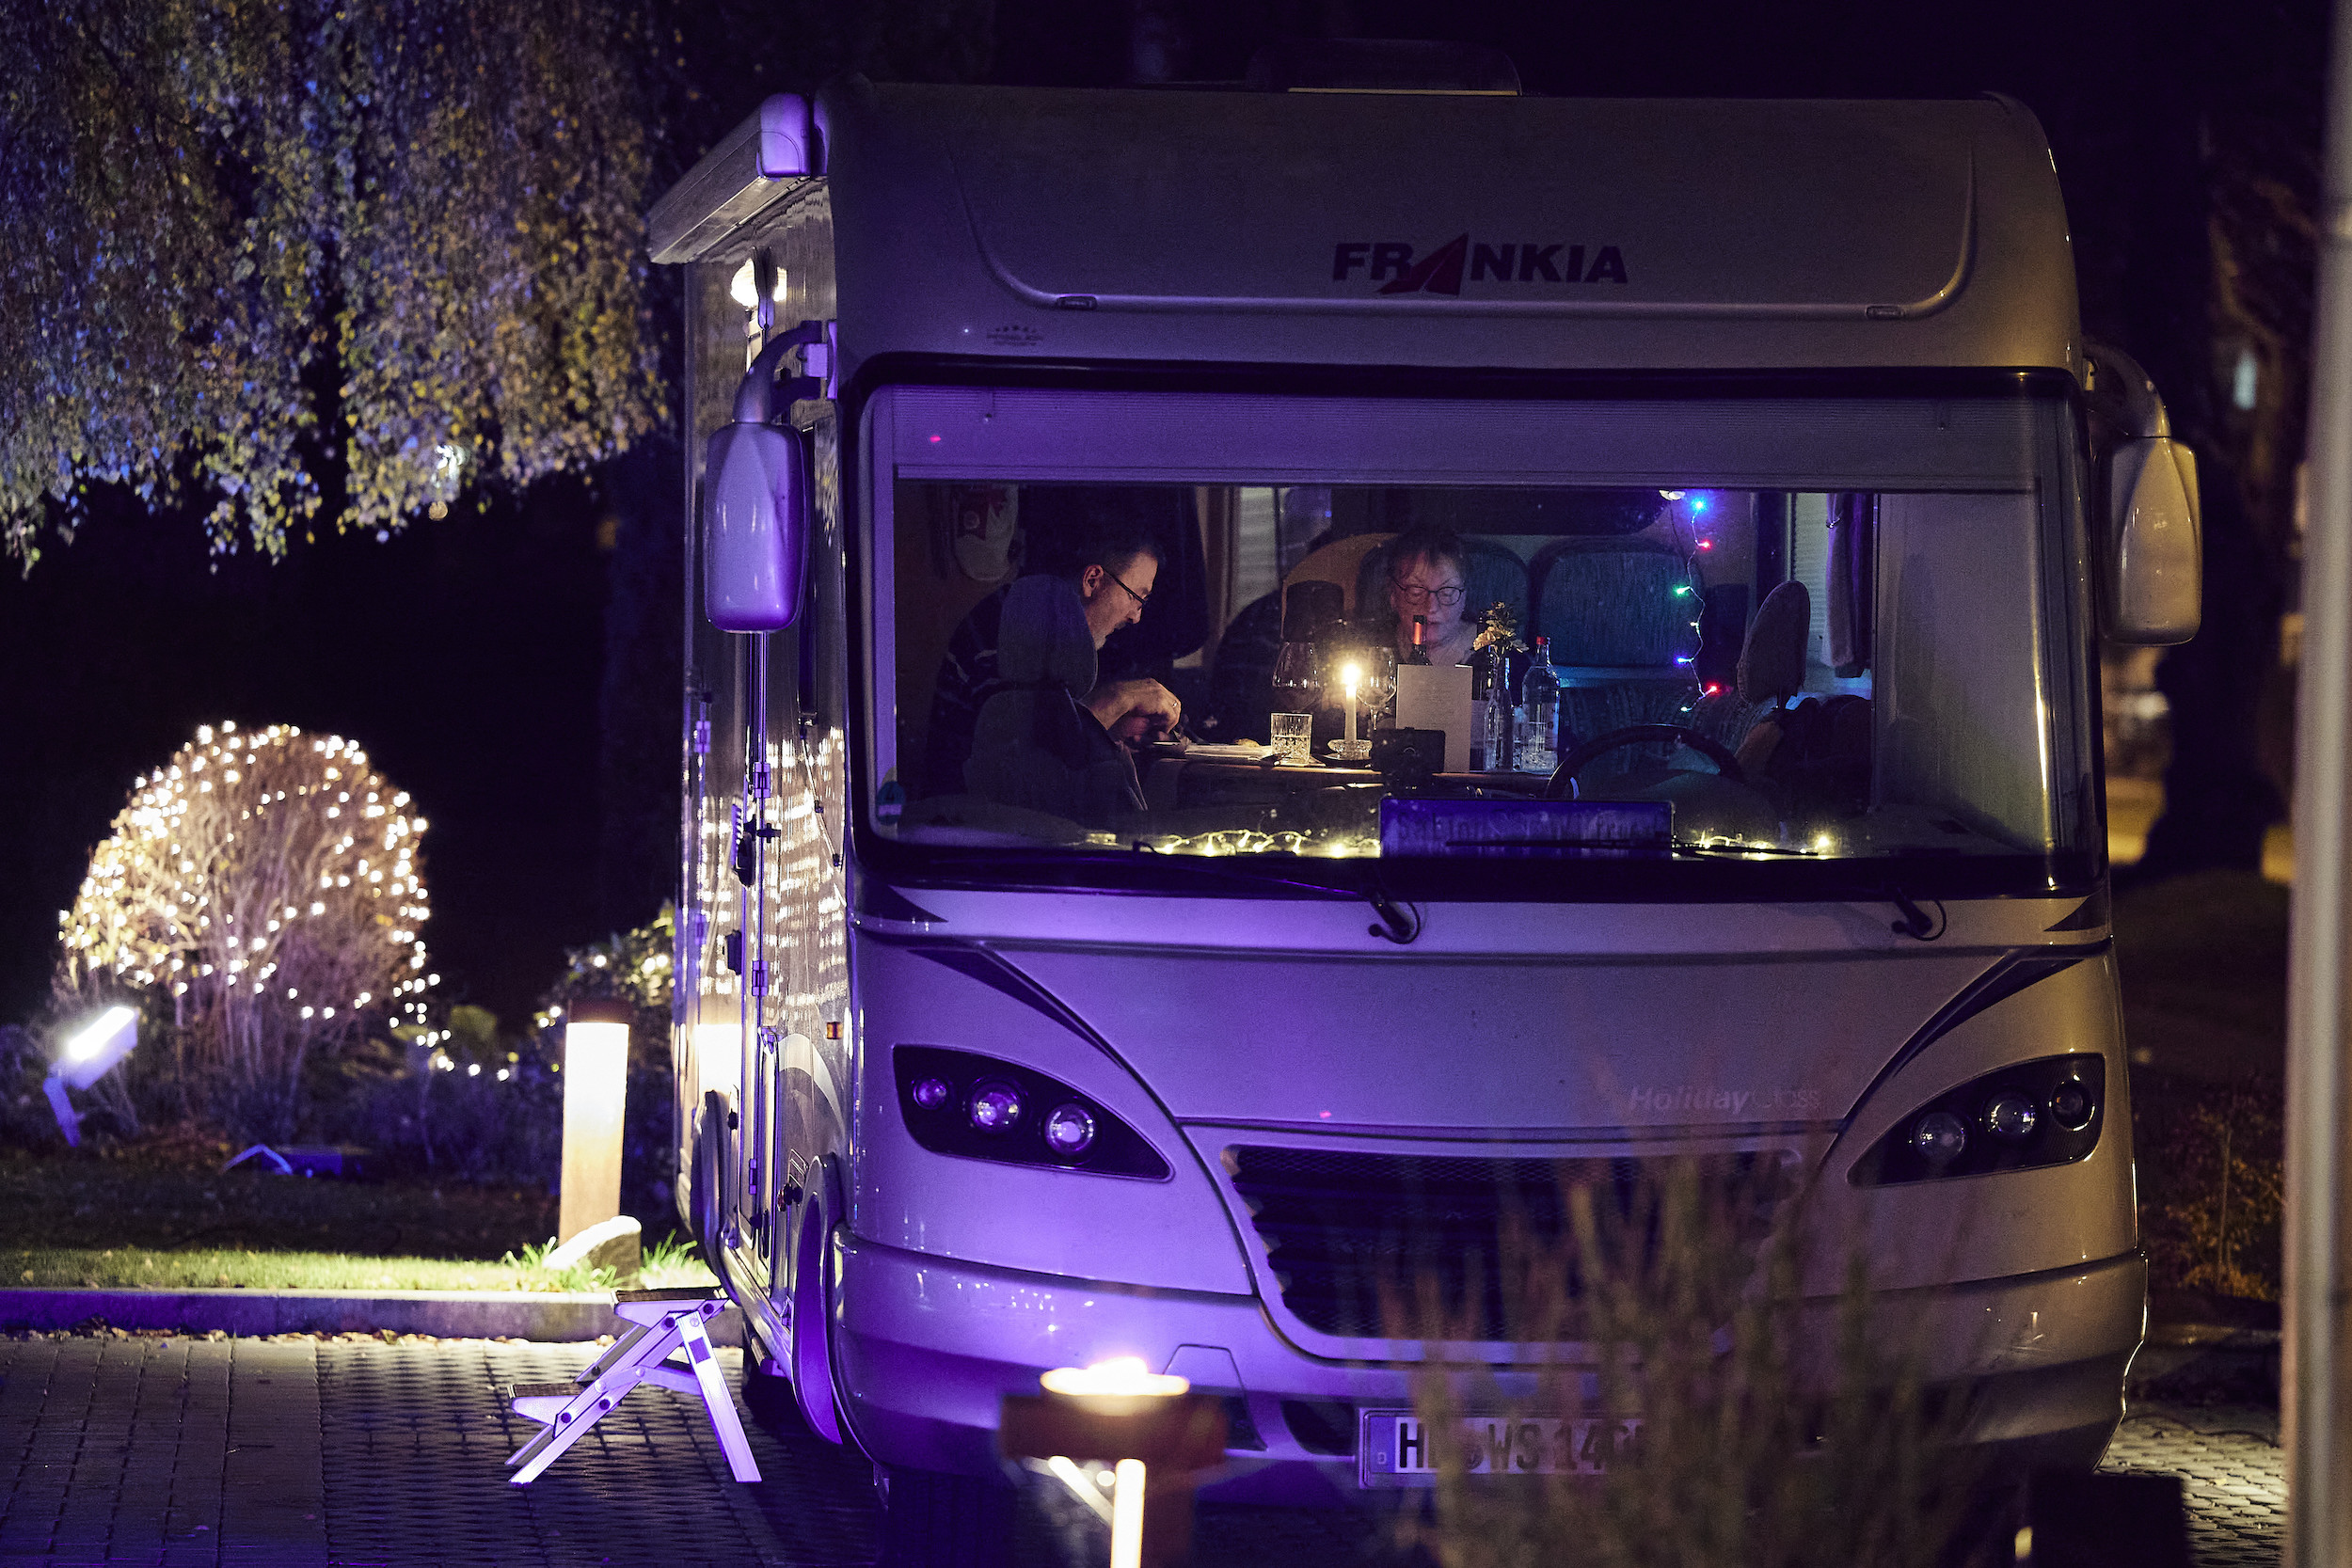 A couple enjoys the main dish of a four-course dinner in their recreational vehicle (RV) in the parking lot of the Kochschule Neumuenster cooking school